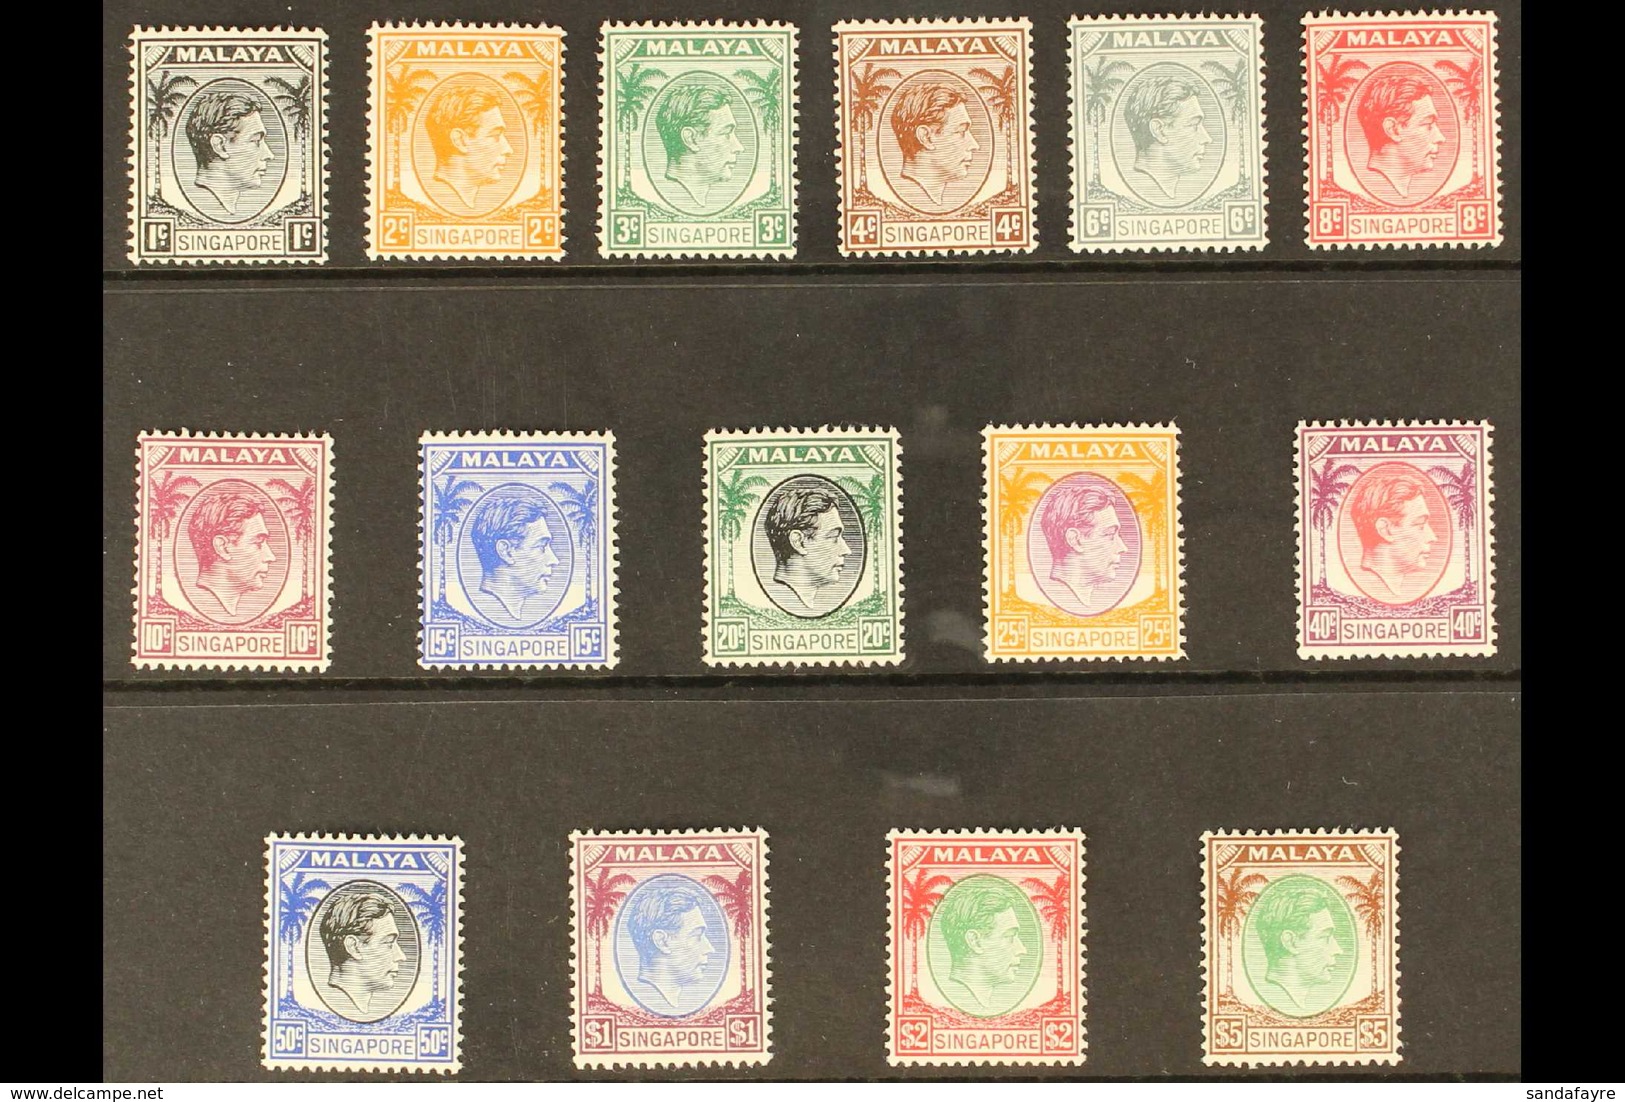 1948-52 KGVI Definitives Perf 14 Complete Set, SG 1/15, Very Fine Mint, Fresh. (15 Stamps) For More Images, Please Visit - Singapore (...-1959)